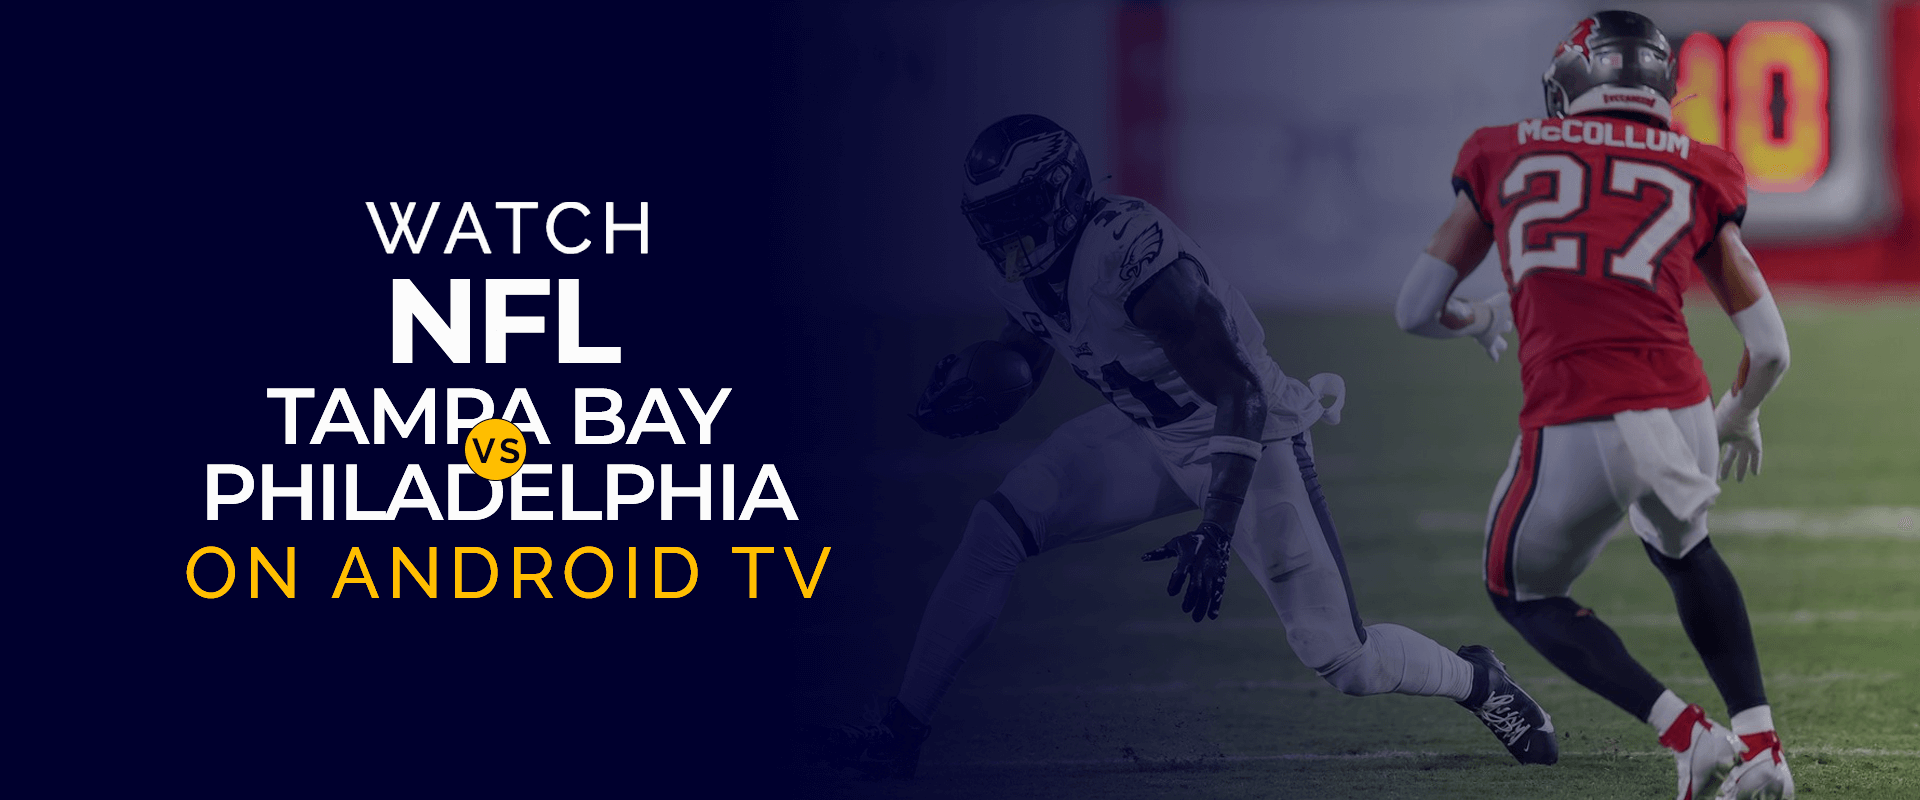 Watch NFL Tampa Bay vs Philadelphia on Android TV